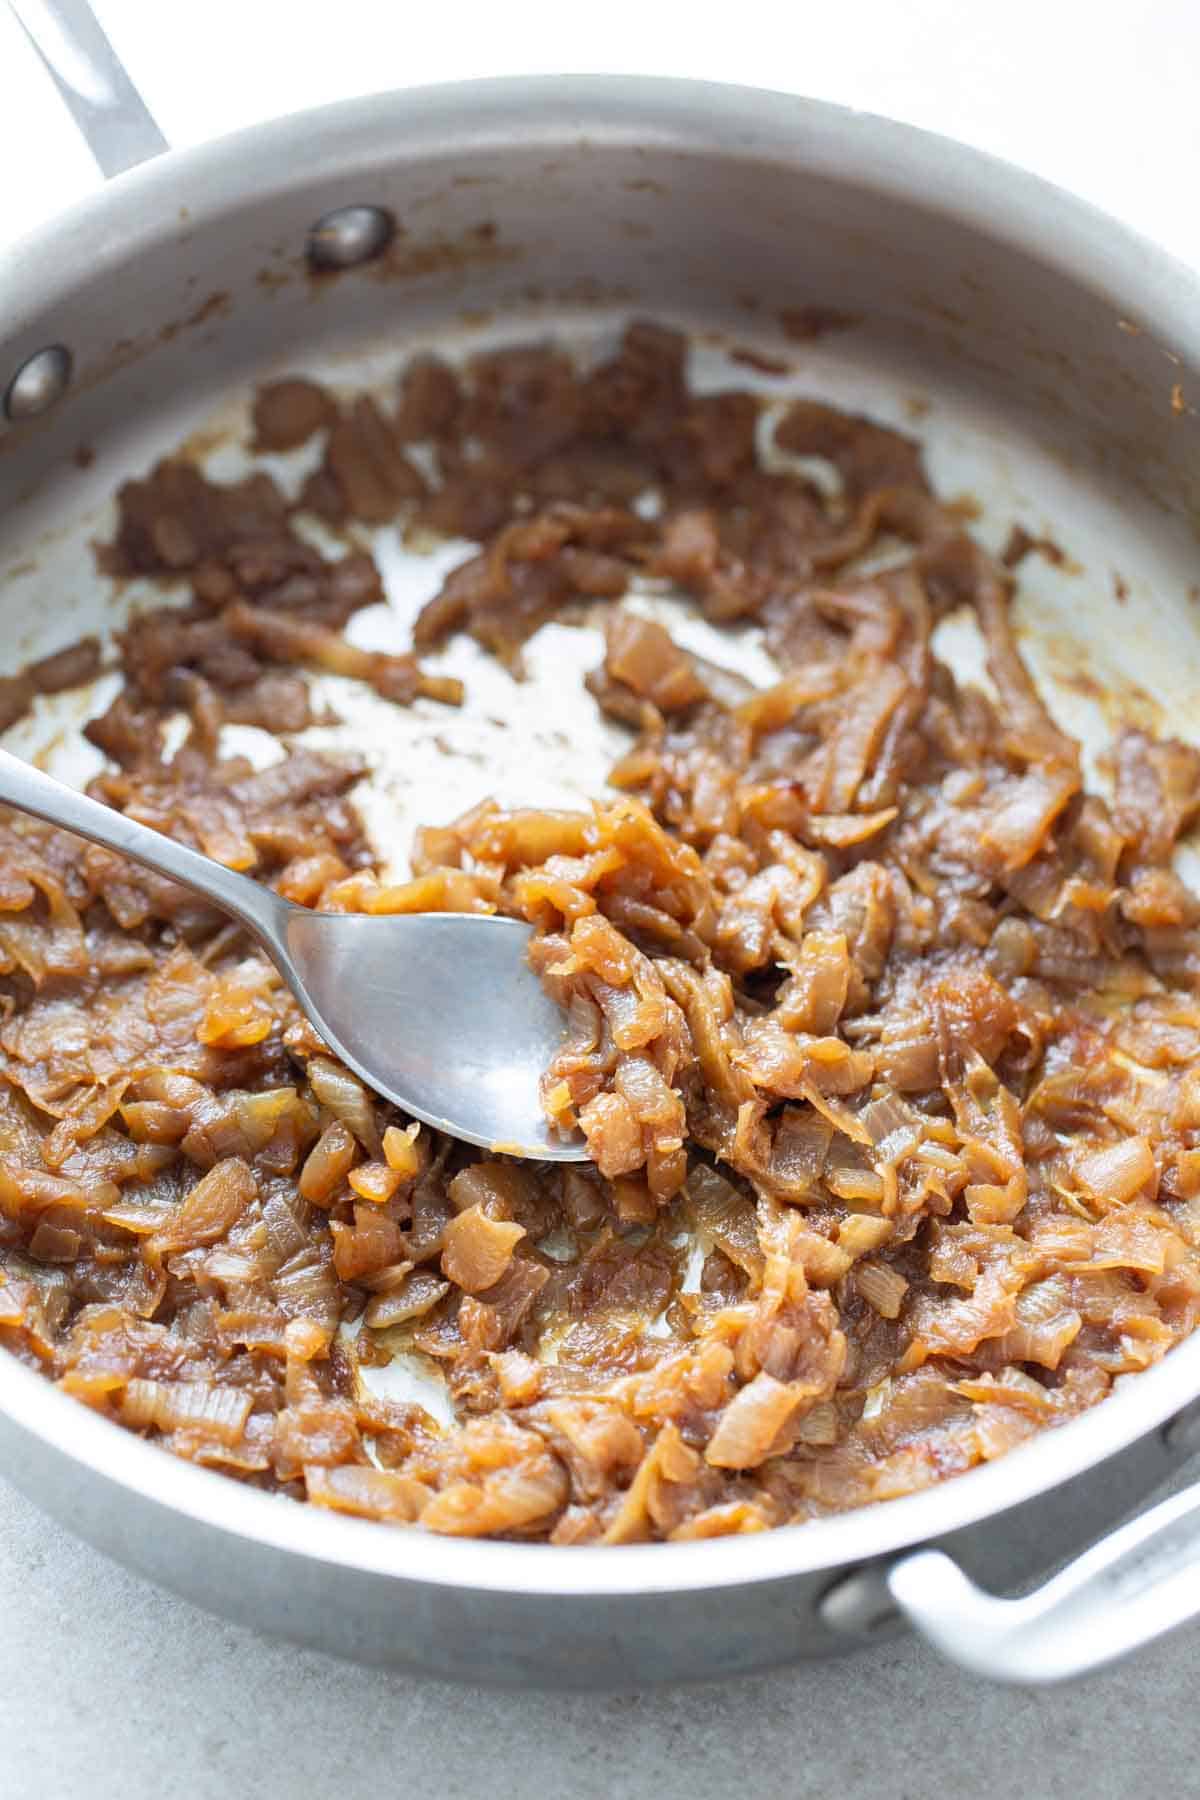 Caramelized onions in a pan with a spoon.